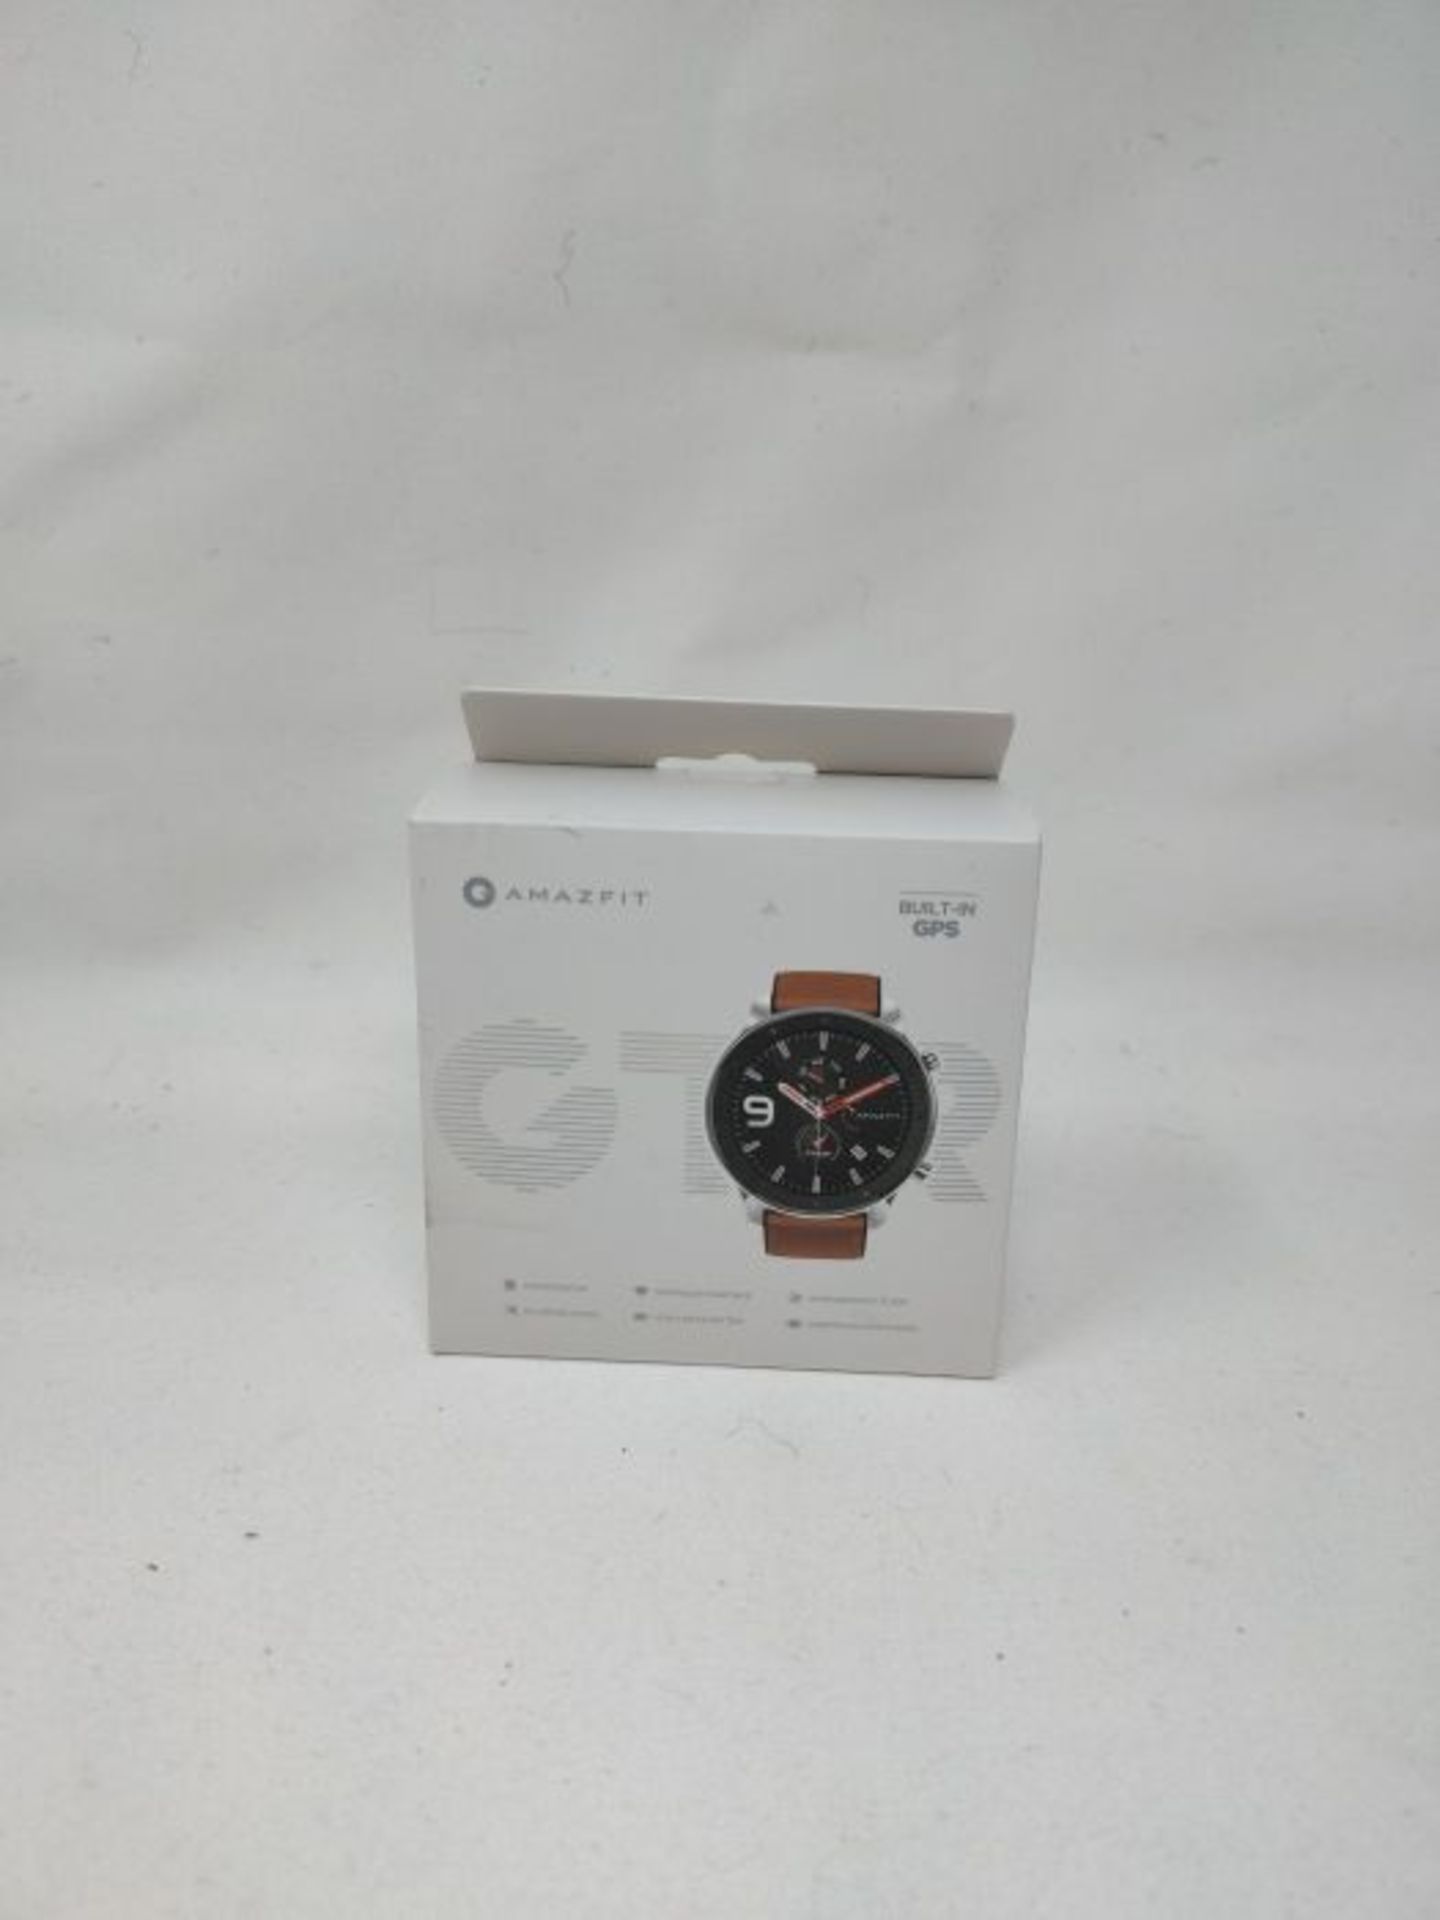 RRP £88.00 Amazfit A1902 Smartwatch GTR 47mm 1,39 Zoll Touch Control Farbdisplay Sportuhr Fitness - Image 2 of 3